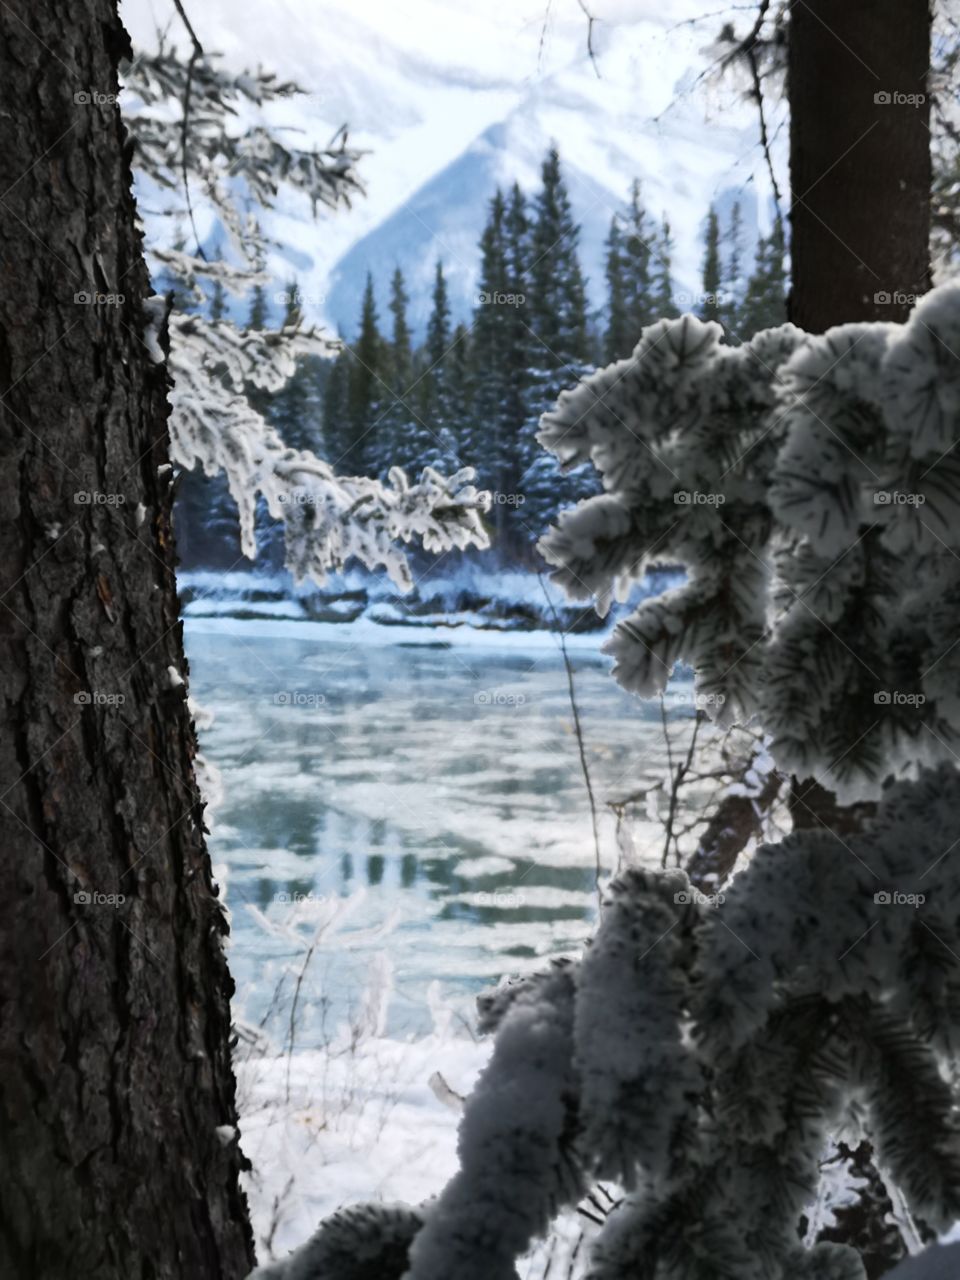 winter snow ice water river freezing trees with bark branches and mountain in background